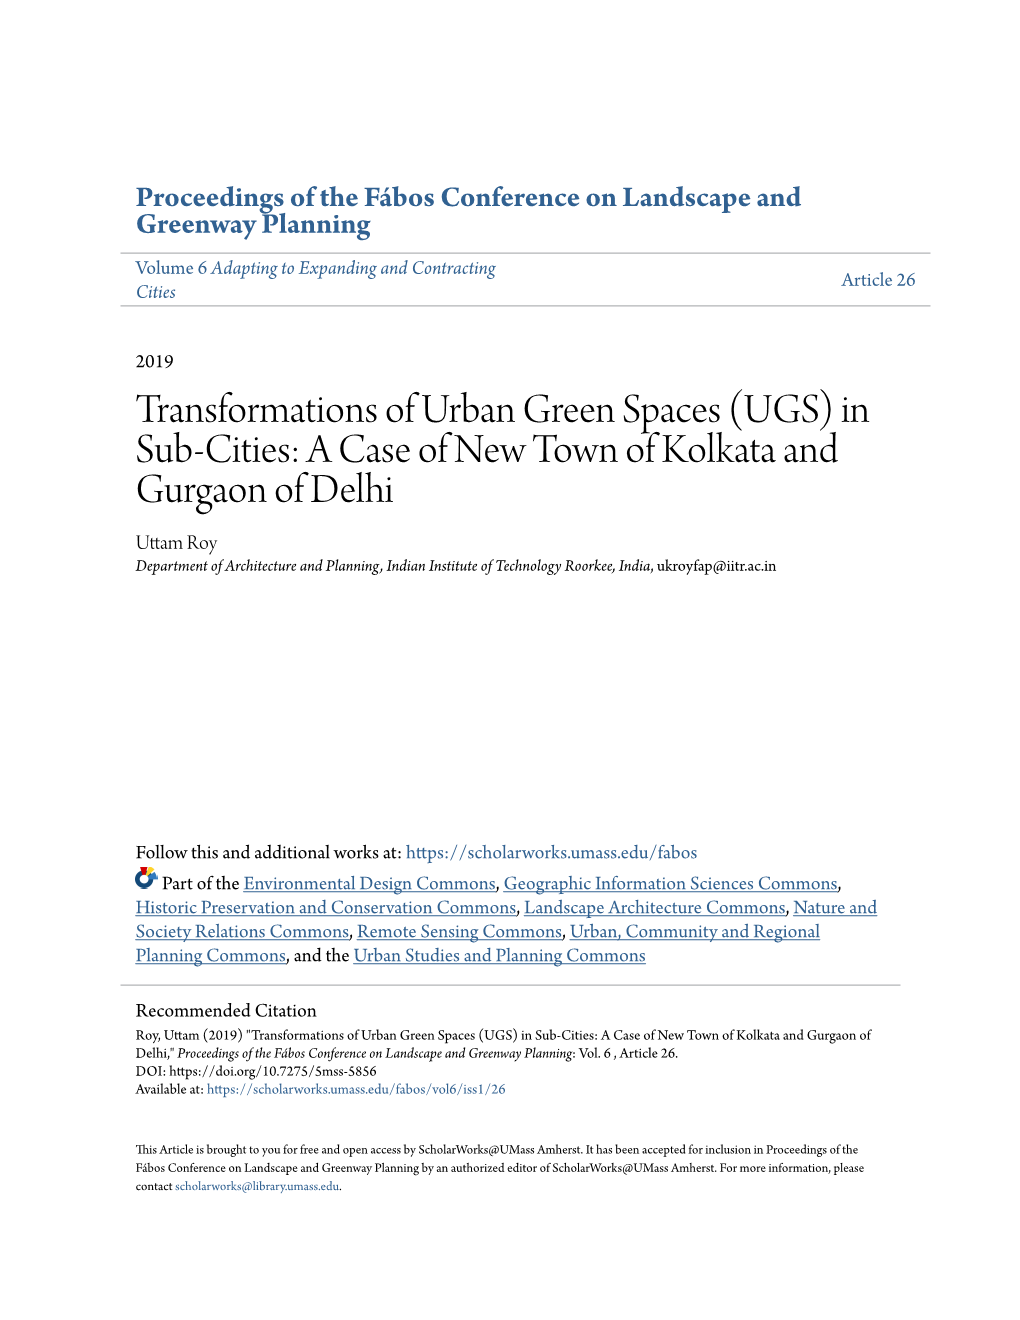 Transformations of Urban Green Spaces (UGS) in Sub-Cities